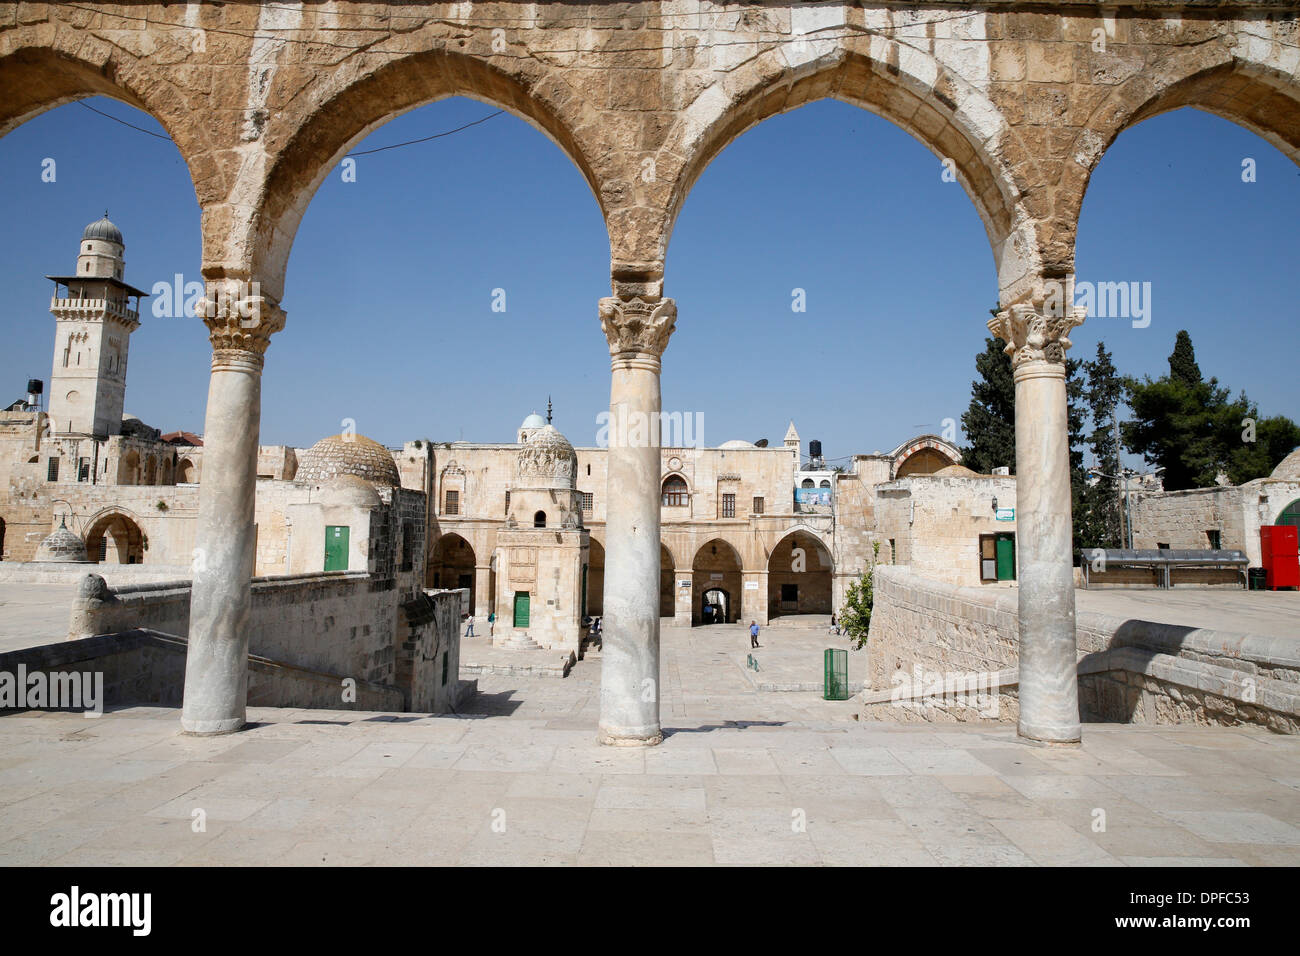 Stone arches at Dome of the Rock, UNESCO World Heritage Site, Jerusalem, Israel, Middle East Stock Photo